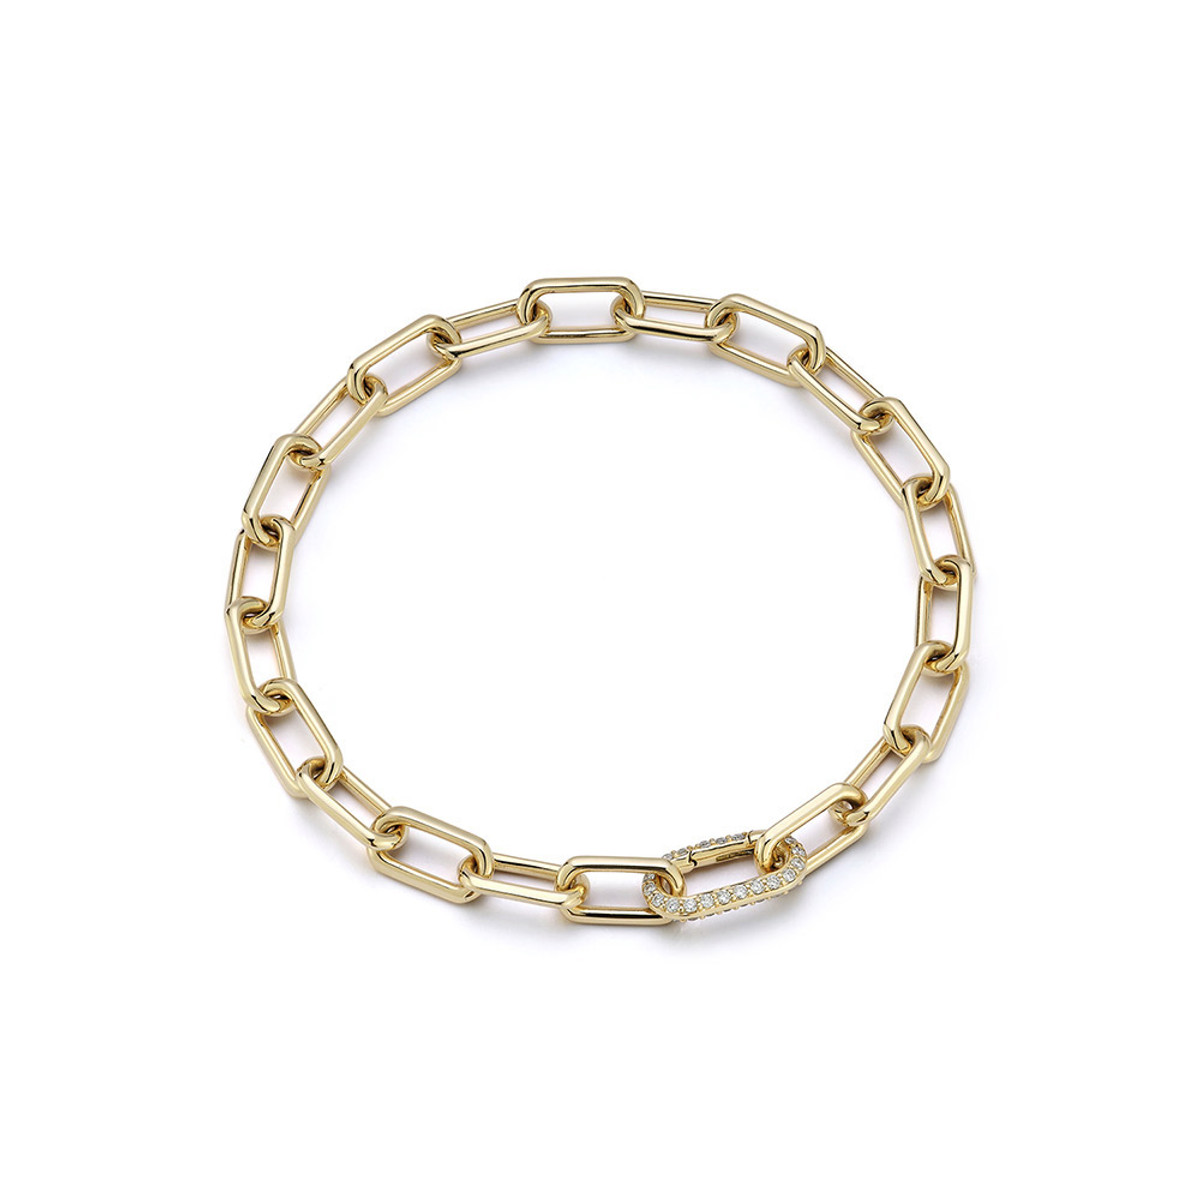 Walters Faith Clive 18K Yellow Gold Chain Link Bracelet with All Diamond Lobster Clasp-56175 Product Image